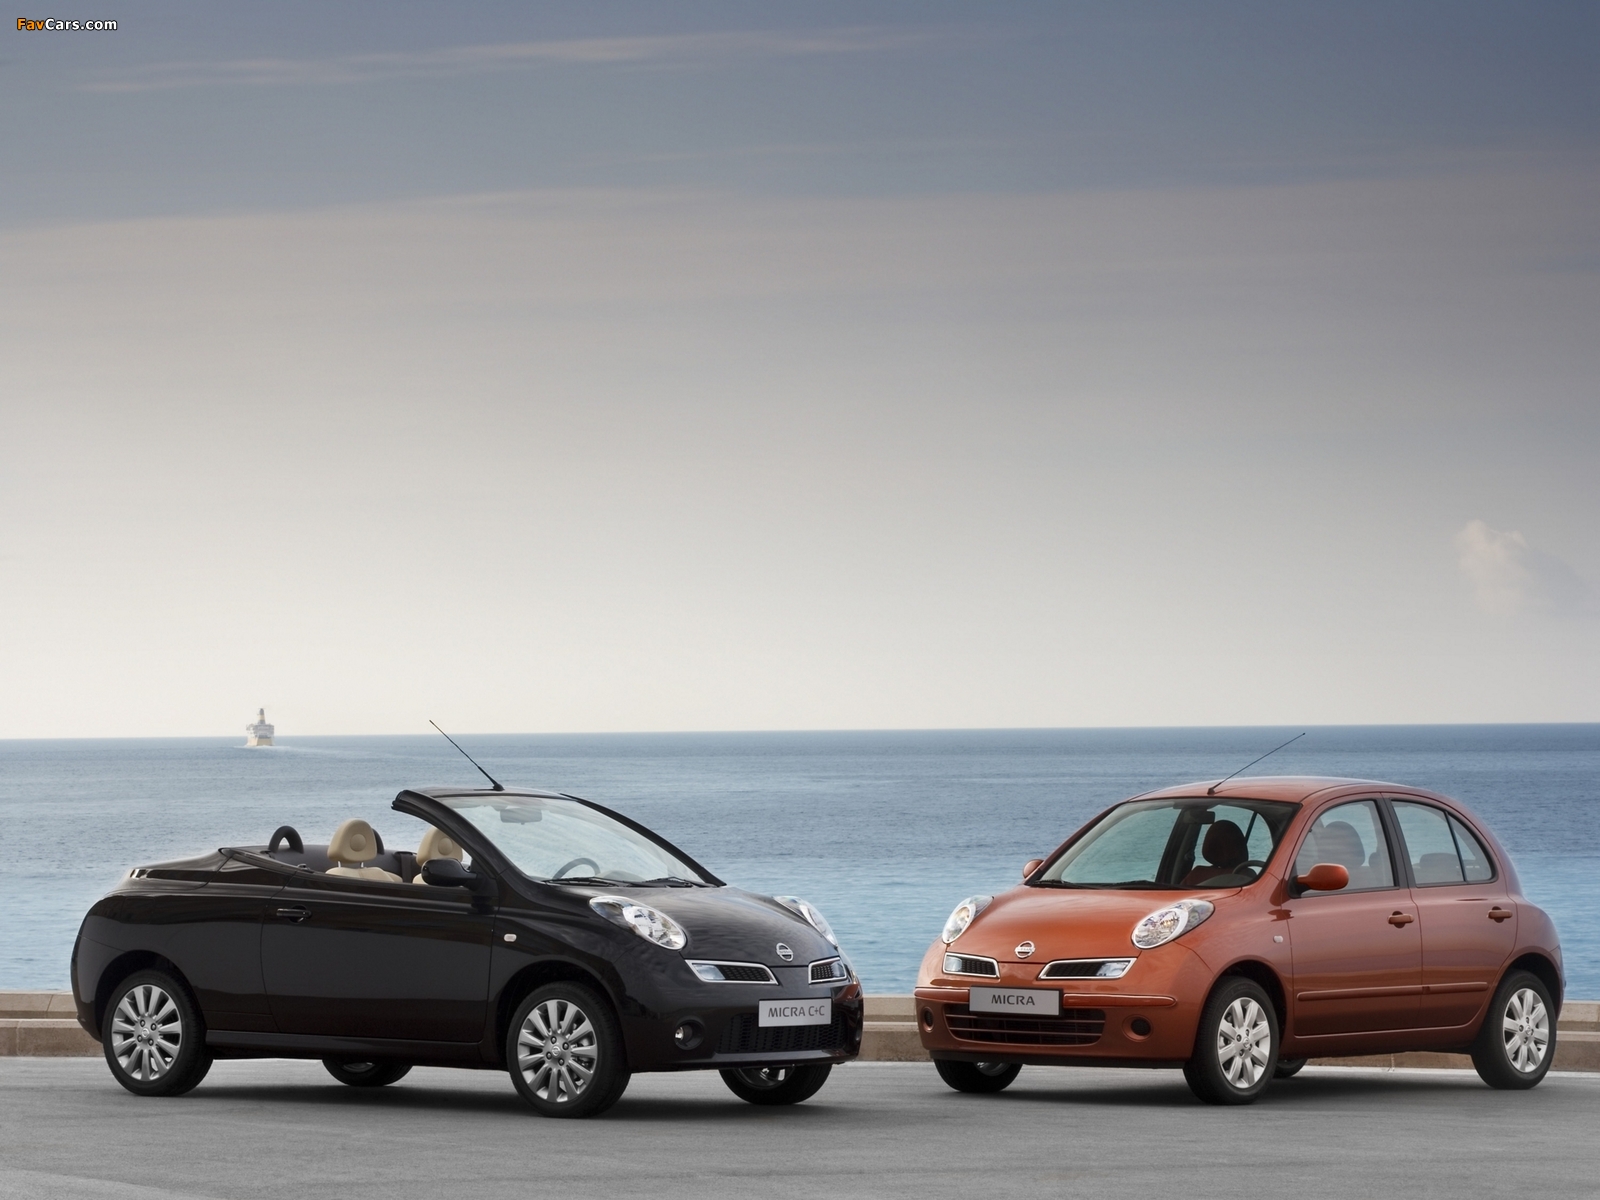 Pictures of Nissan Micra (1600 x 1200)